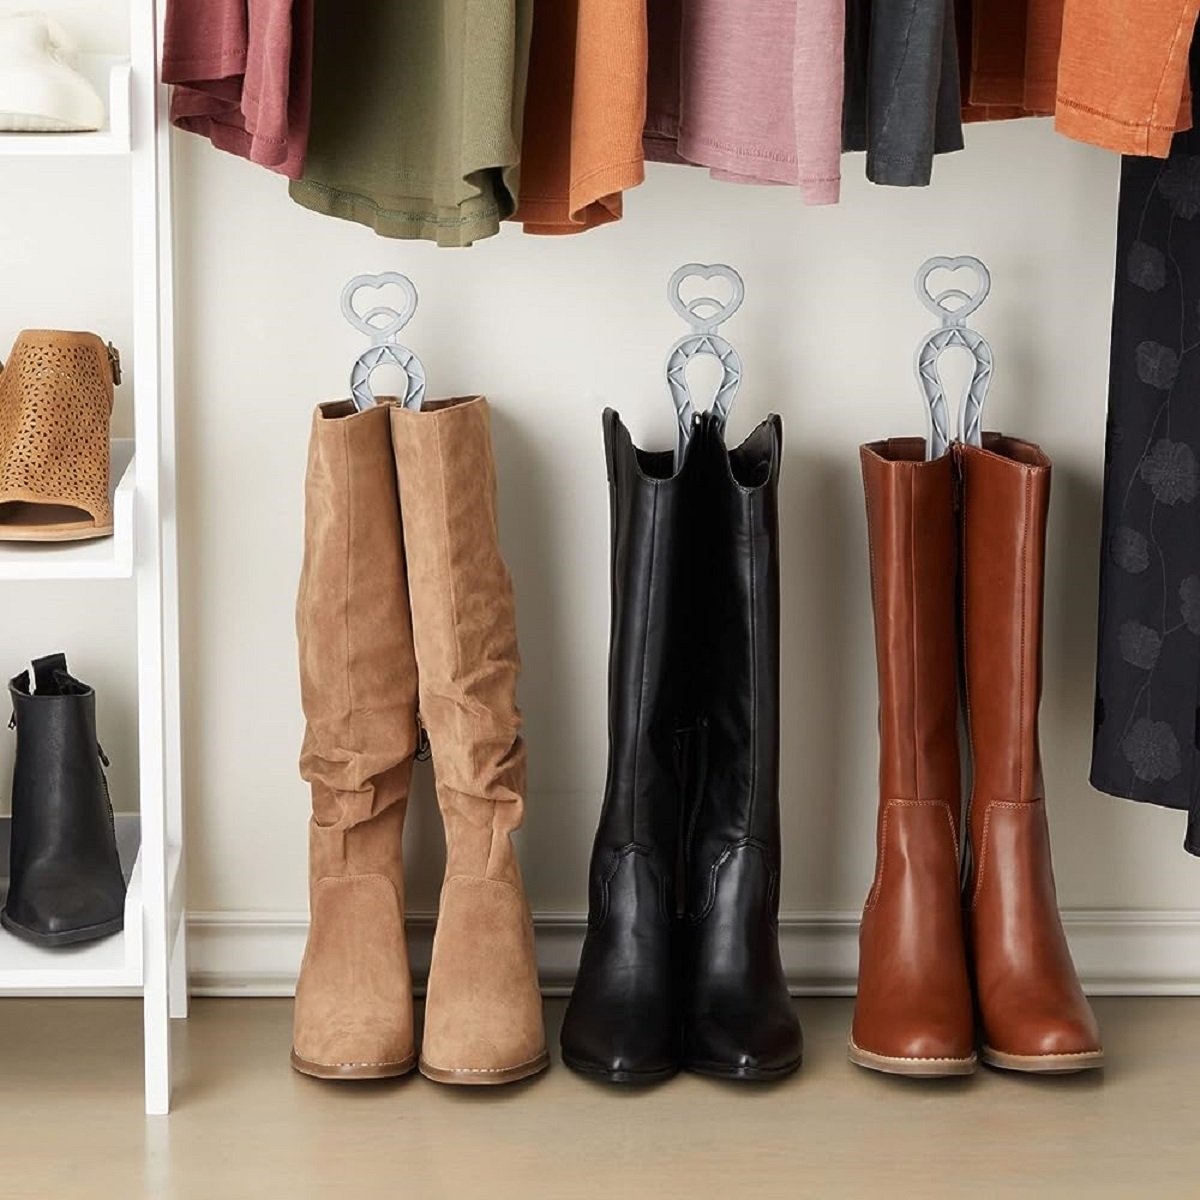 How To Store Knee High Boots